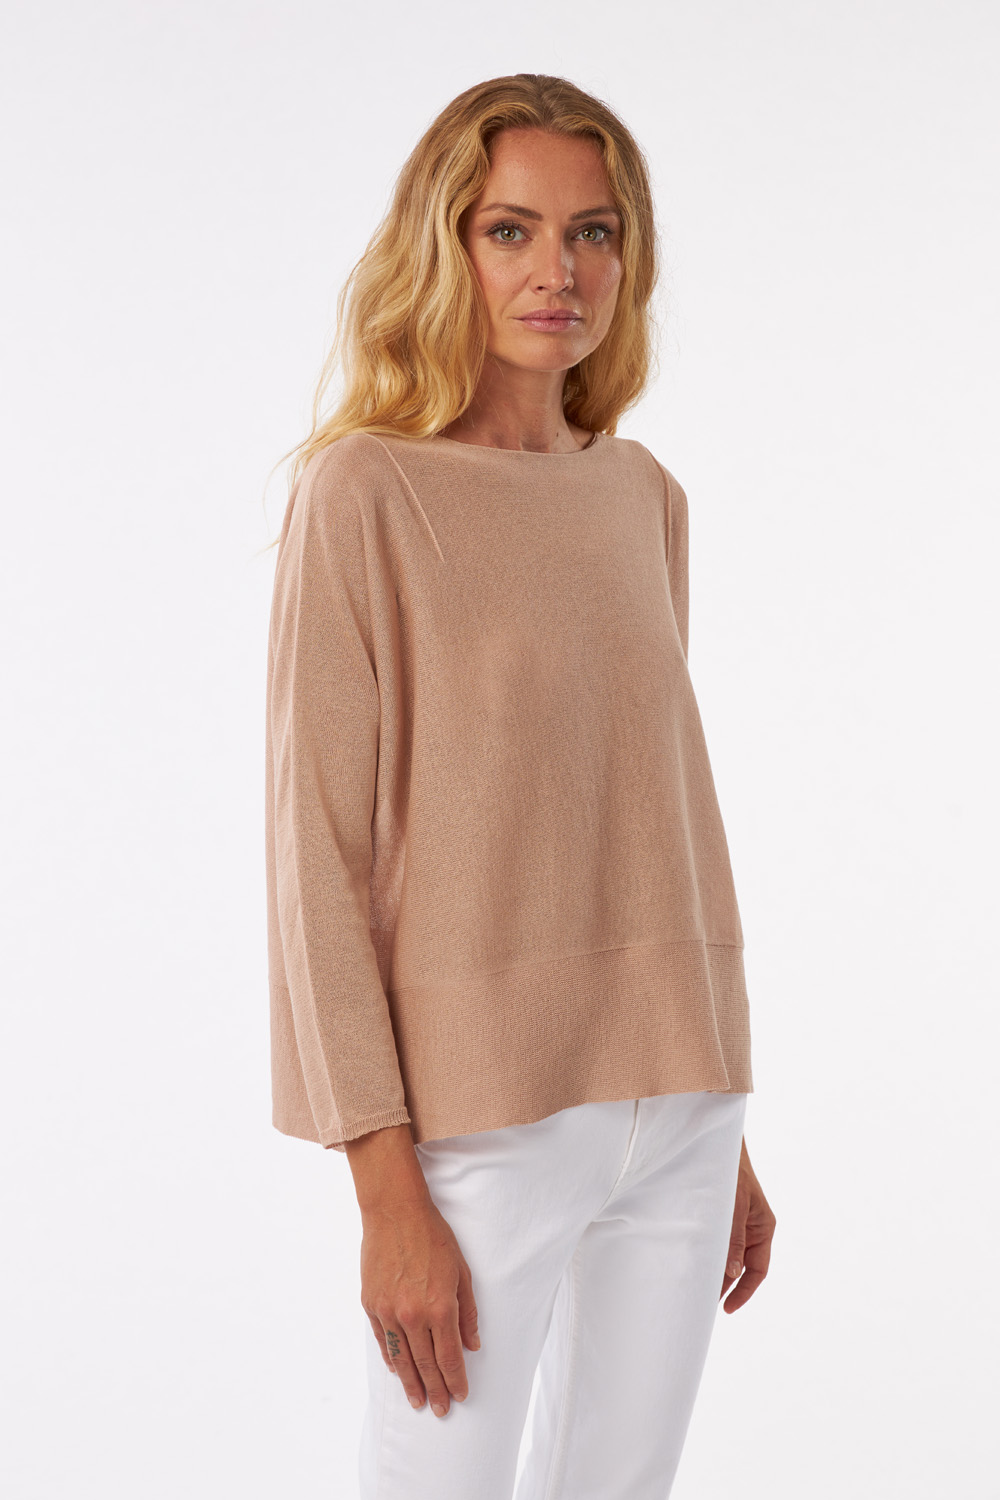 boat neck sweater in 90% cotton and 10% poly